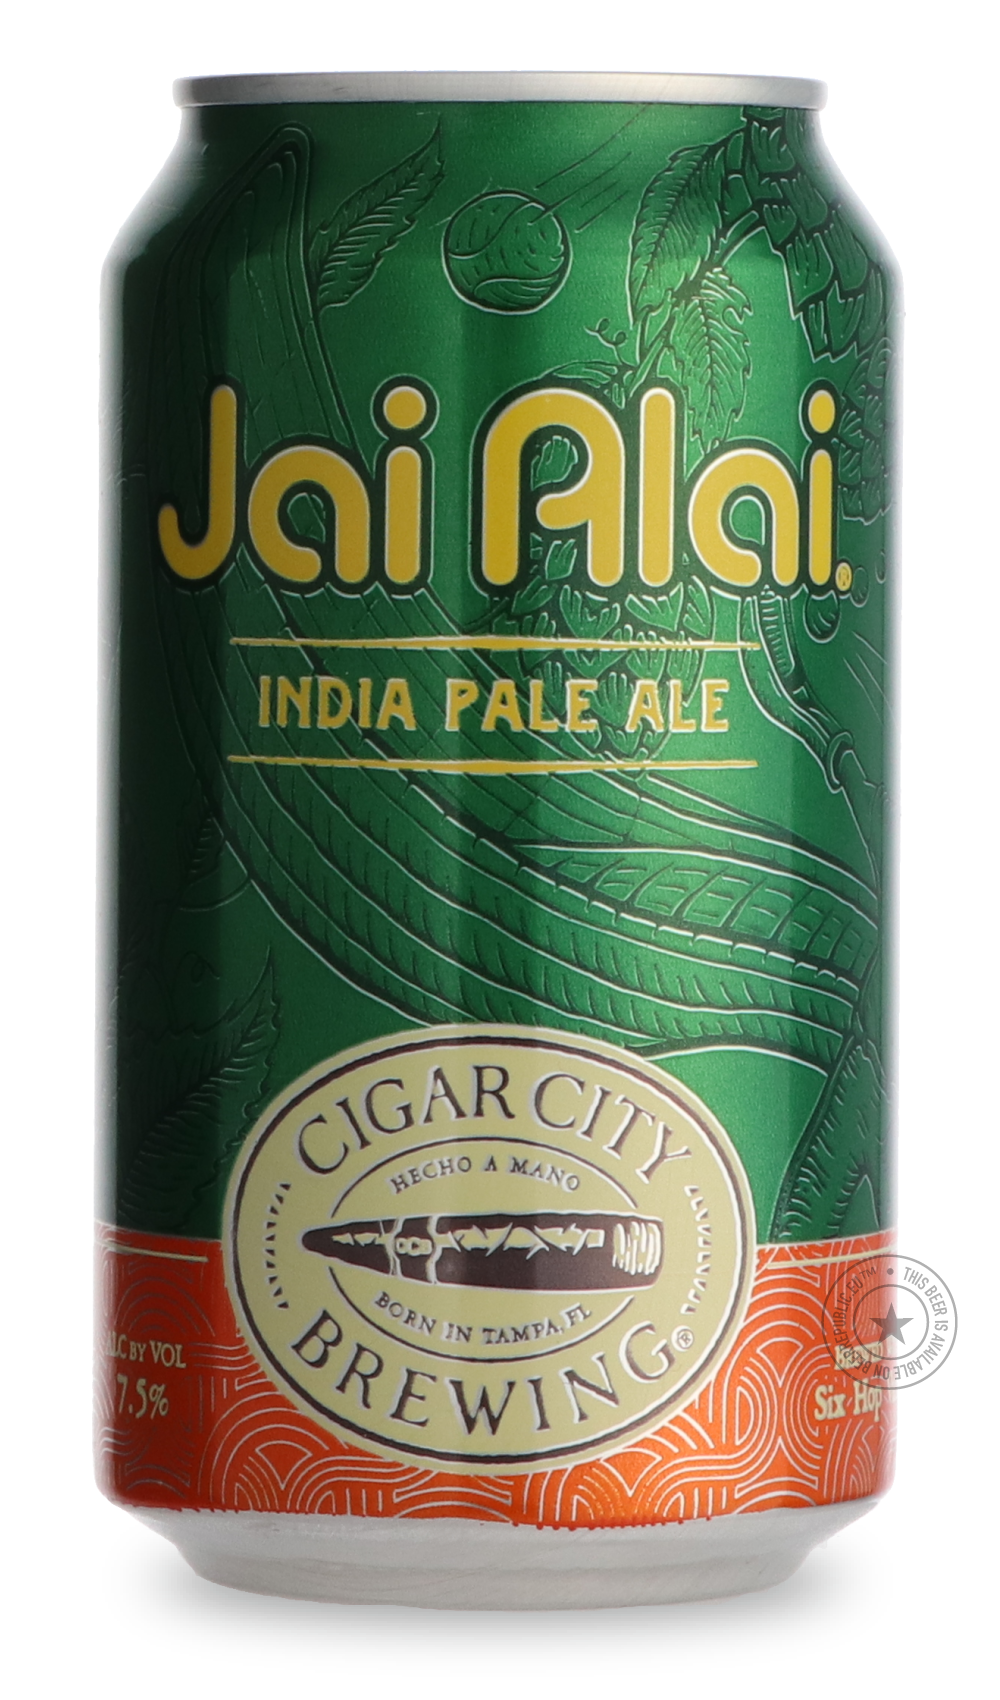 -Cigar City- Jai Alai®-IPA- Only @ Beer Republic - The best online beer store for American & Canadian craft beer - Buy beer online from the USA and Canada - Bier online kopen - Amerikaans bier kopen - Craft beer store - Craft beer kopen - Amerikanisch bier kaufen - Bier online kaufen - Acheter biere online - IPA - Stout - Porter - New England IPA - Hazy IPA - Imperial Stout - Barrel Aged - Barrel Aged Imperial Stout - Brown - Dark beer - Blond - Blonde - Pilsner - Lager - Wheat - Weizen - Amber - Barley Win